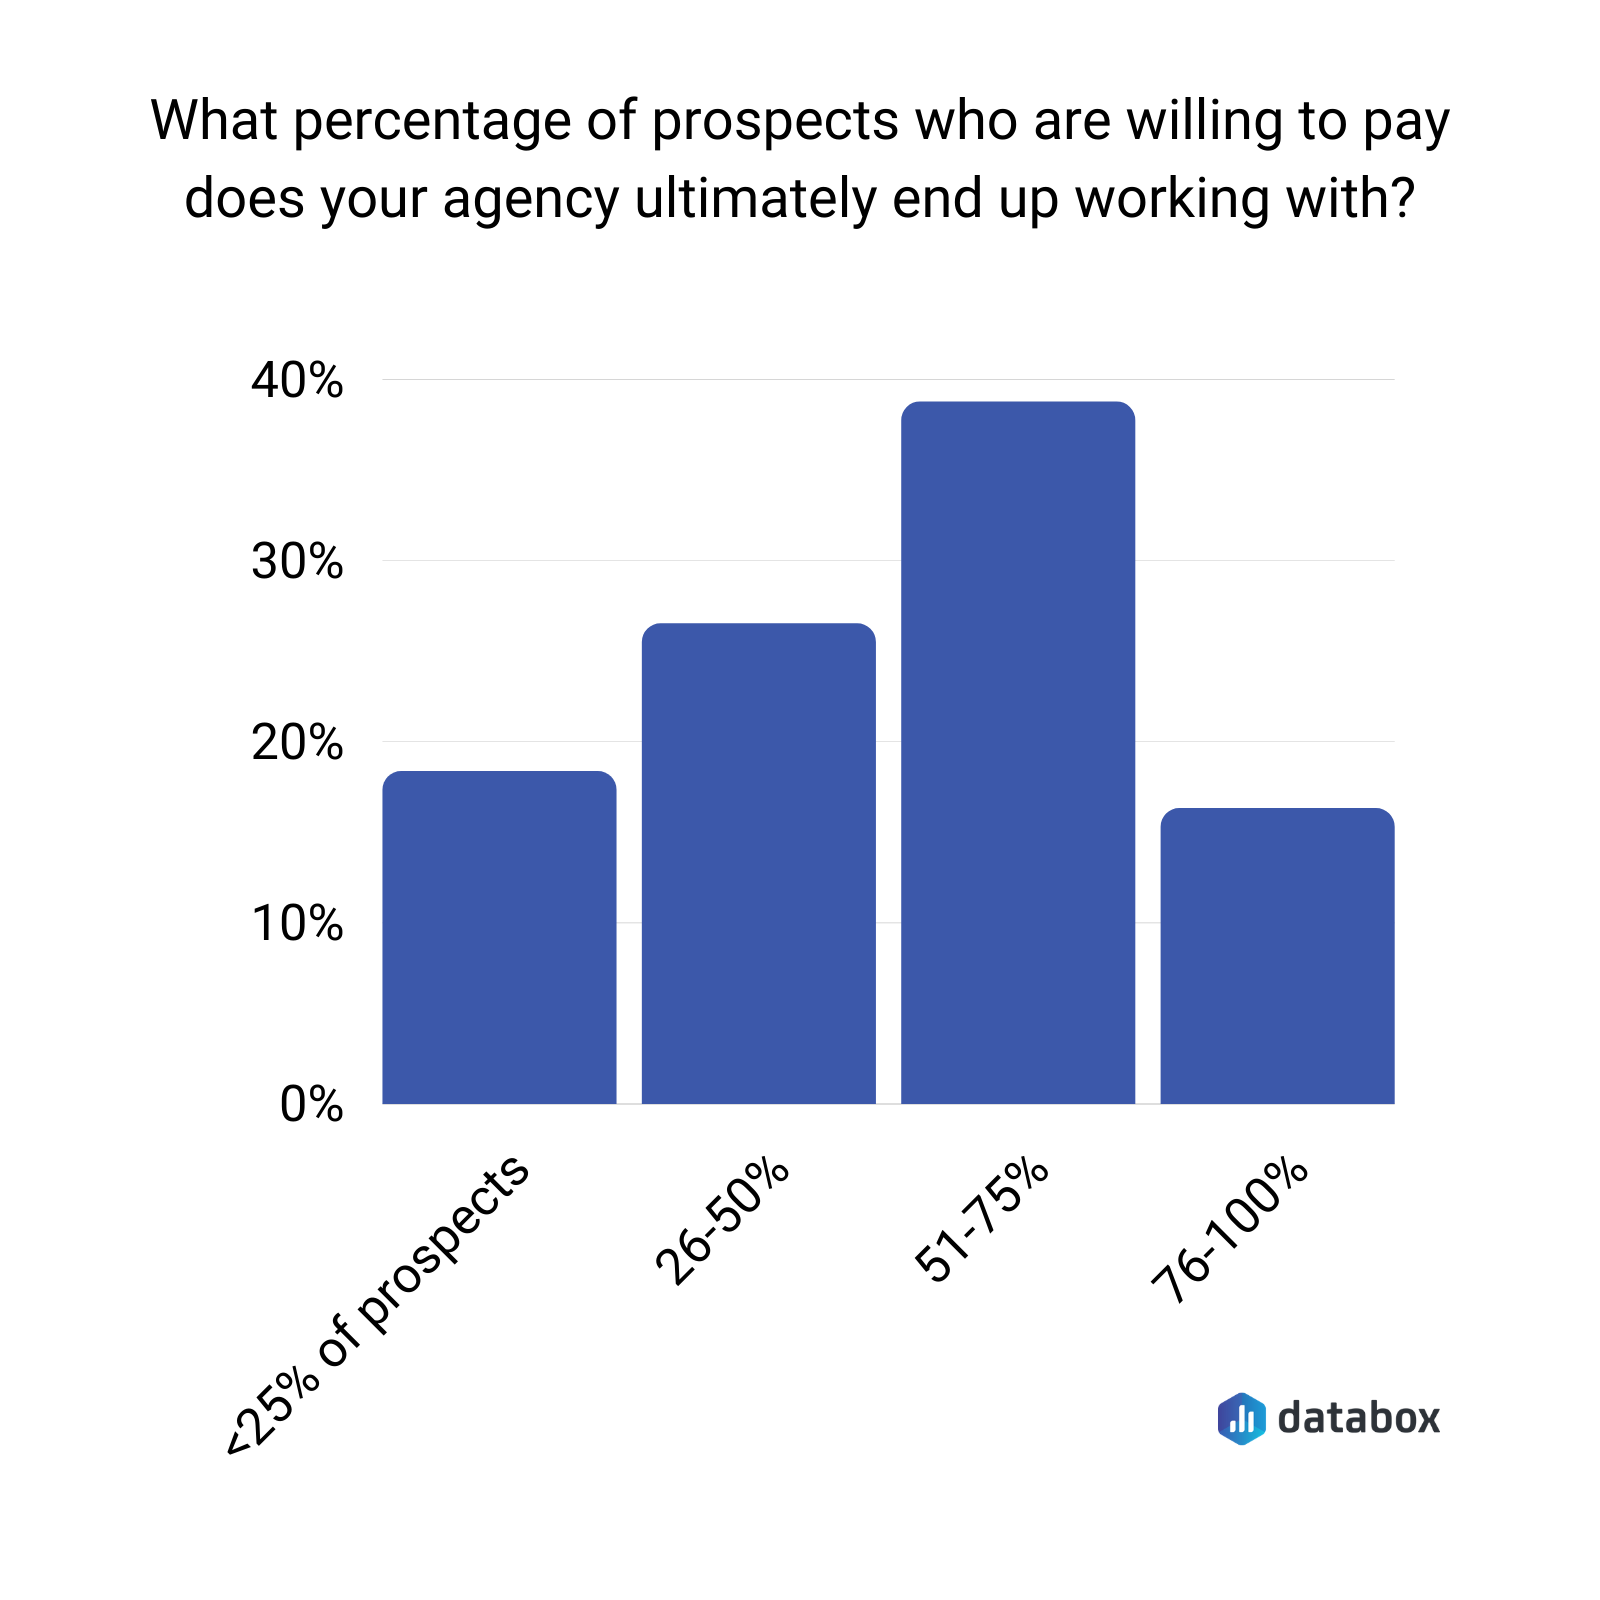 what percentage of prospects who are willing to pay does your agency ultimately end up working with?